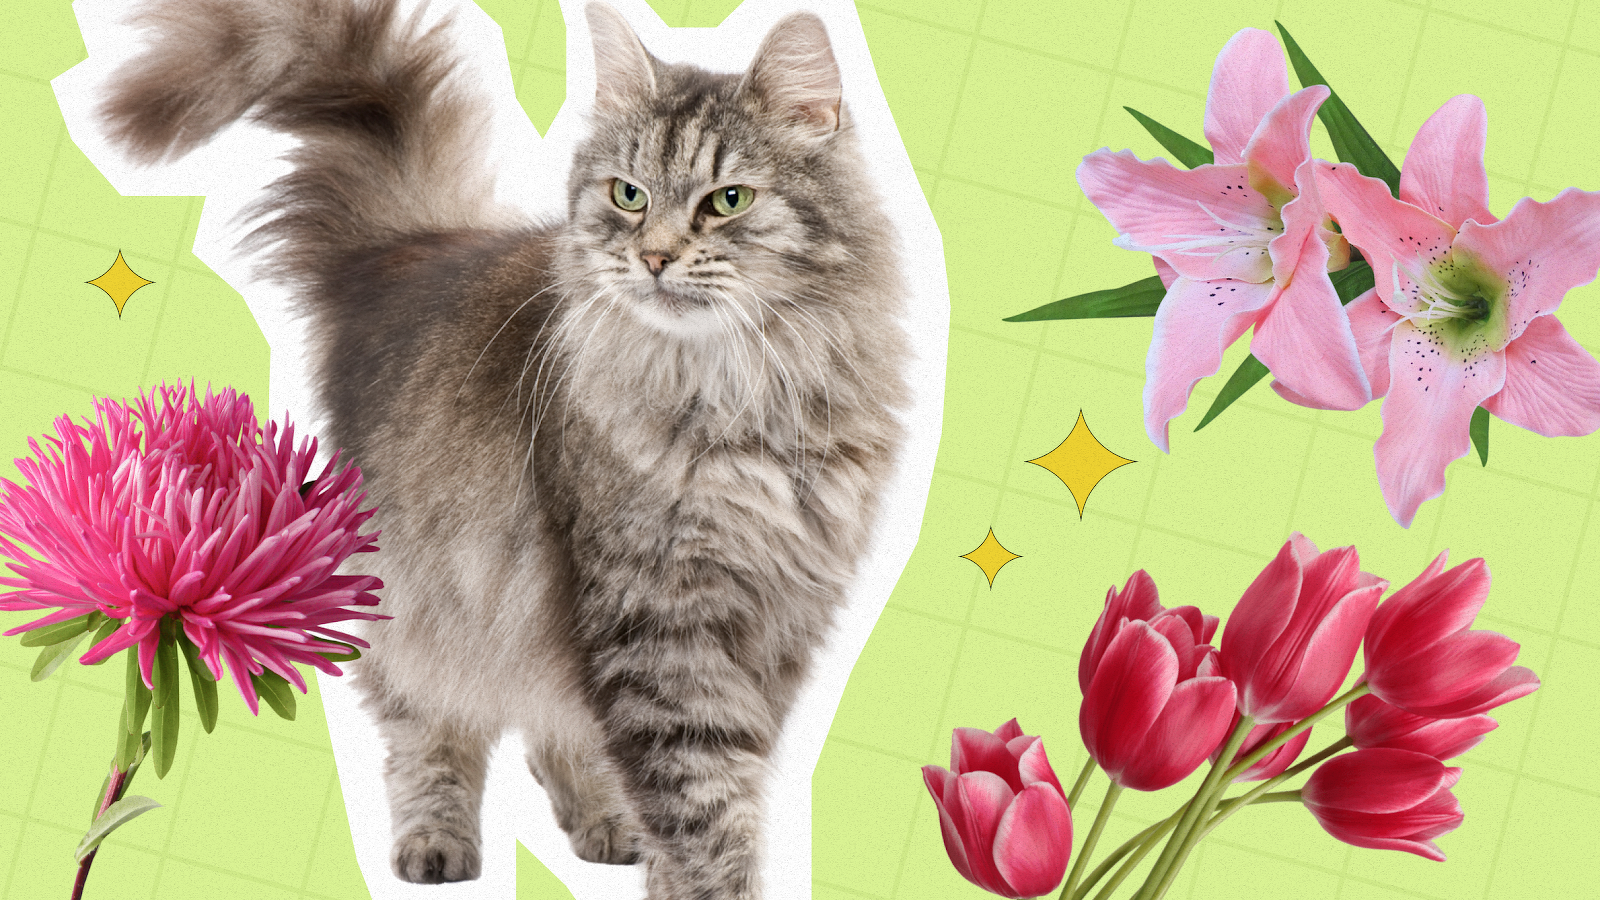 A Guide to Home Flowers and Plants Poisonous to Cats